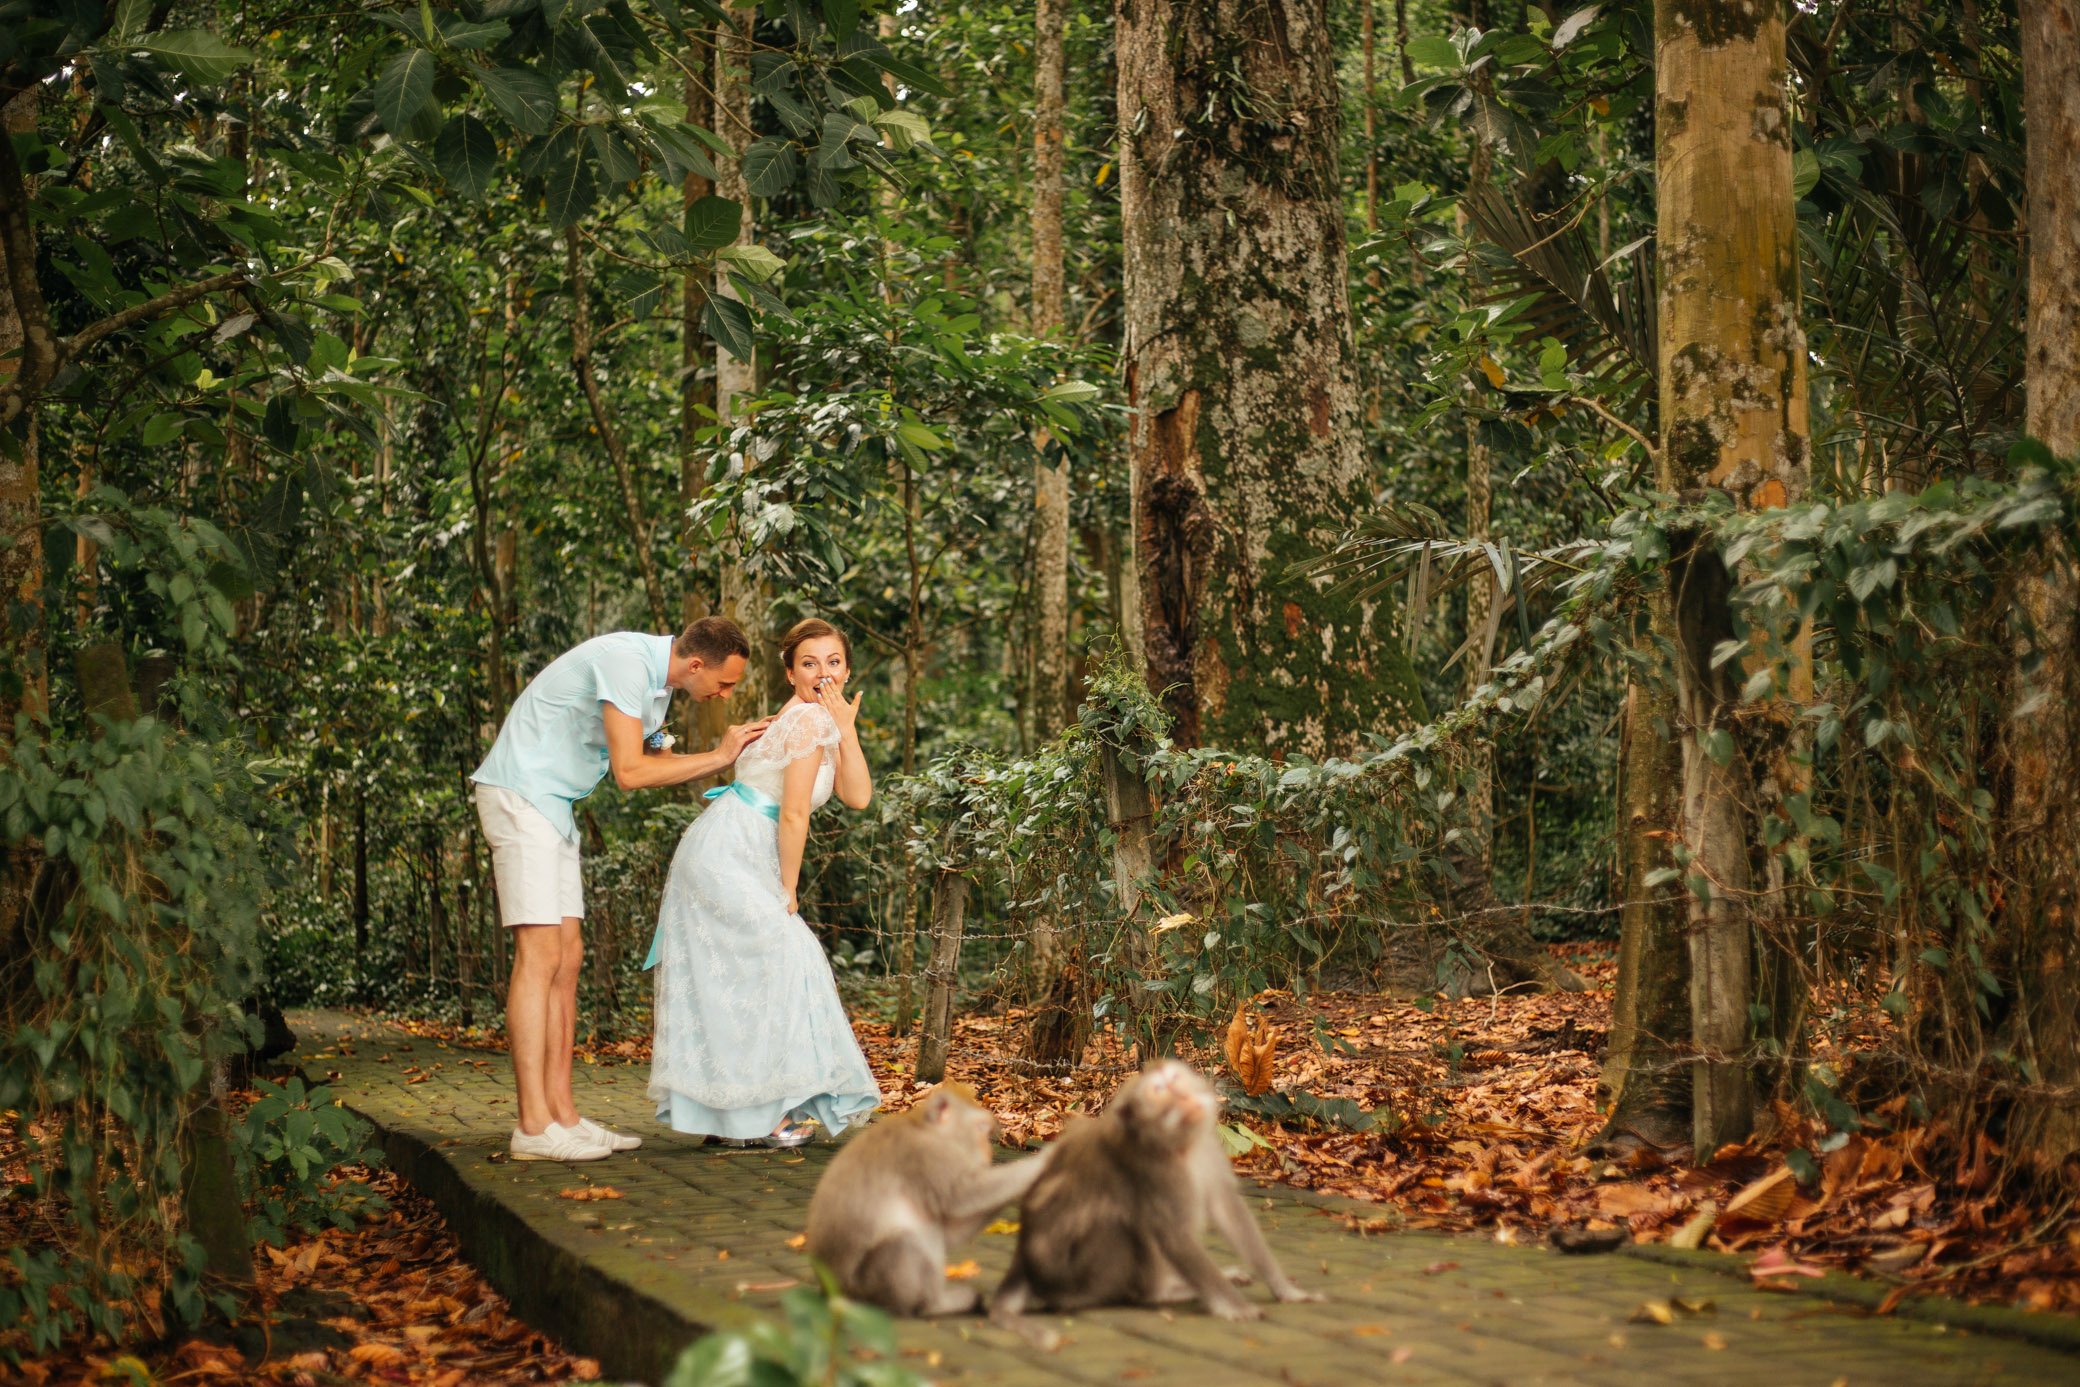 
The forest of monkeys in Ubud, a landmark of Bali. Jungle, monkeys are looking for lice from each other. Bride in wedding dress